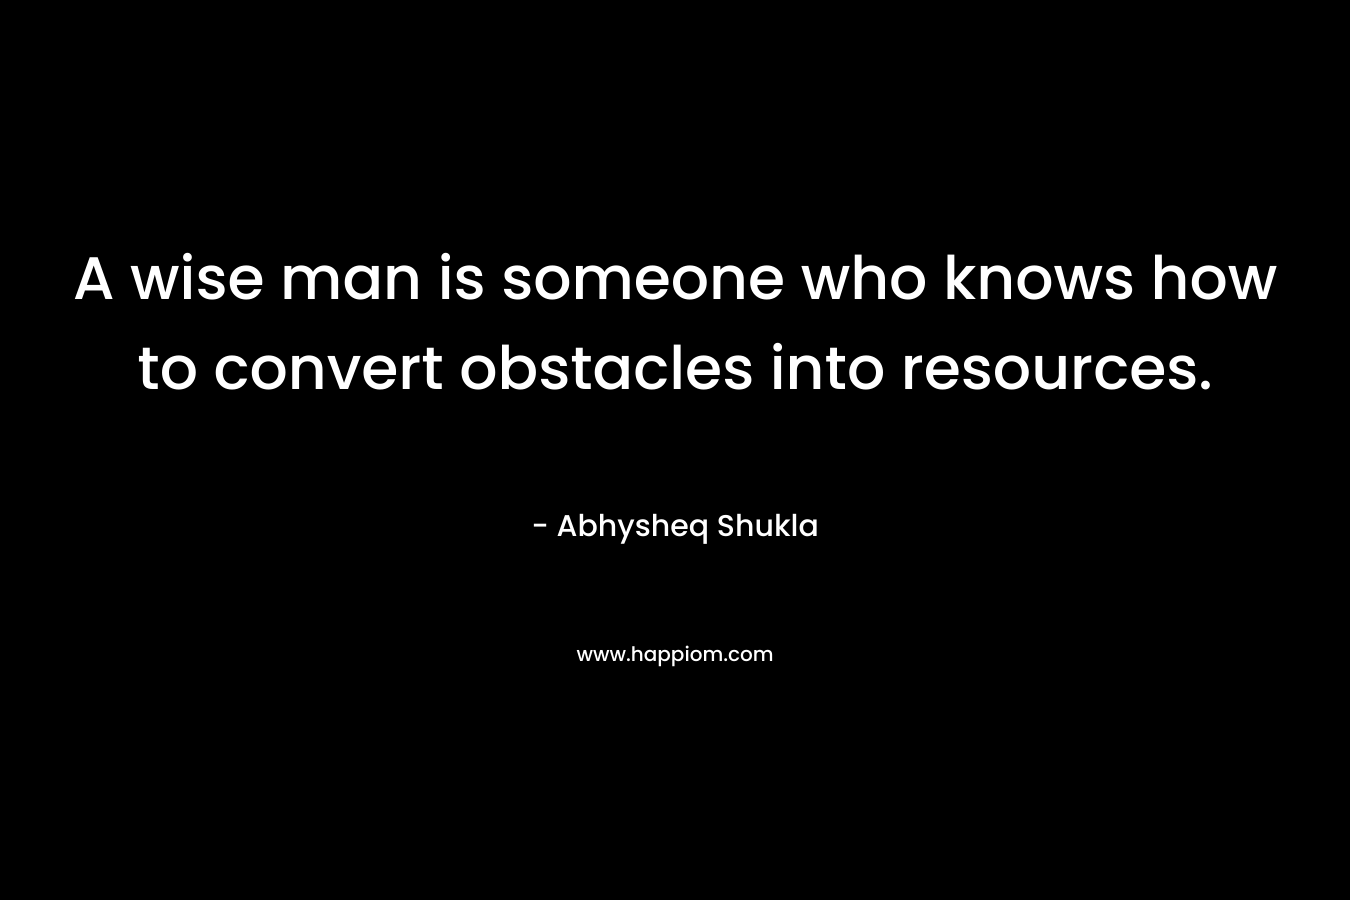 A wise man is someone who knows how to convert obstacles into resources.